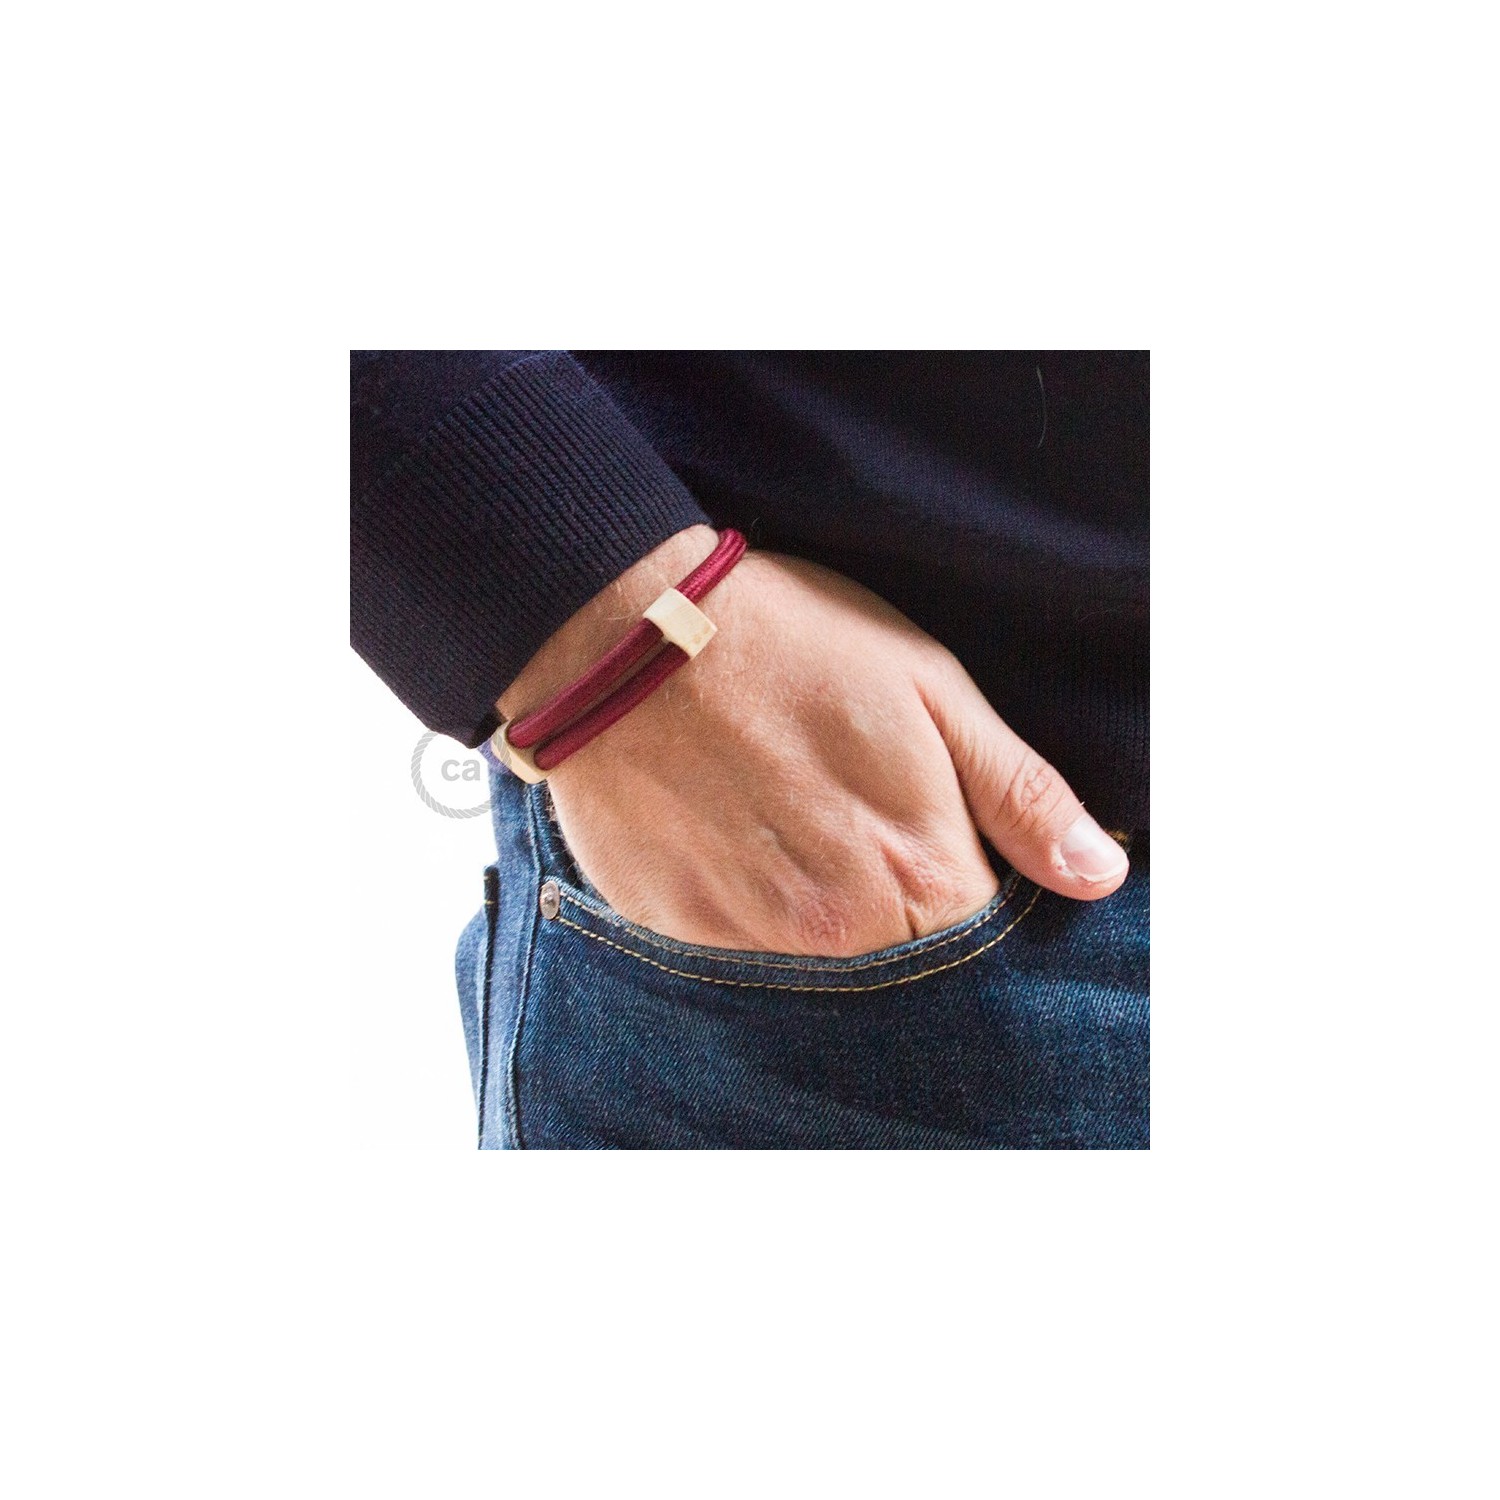 Creative-Bracelet in Rayon solid color Bordeaux RM19. Wood sliding fastening. Made in Italy.